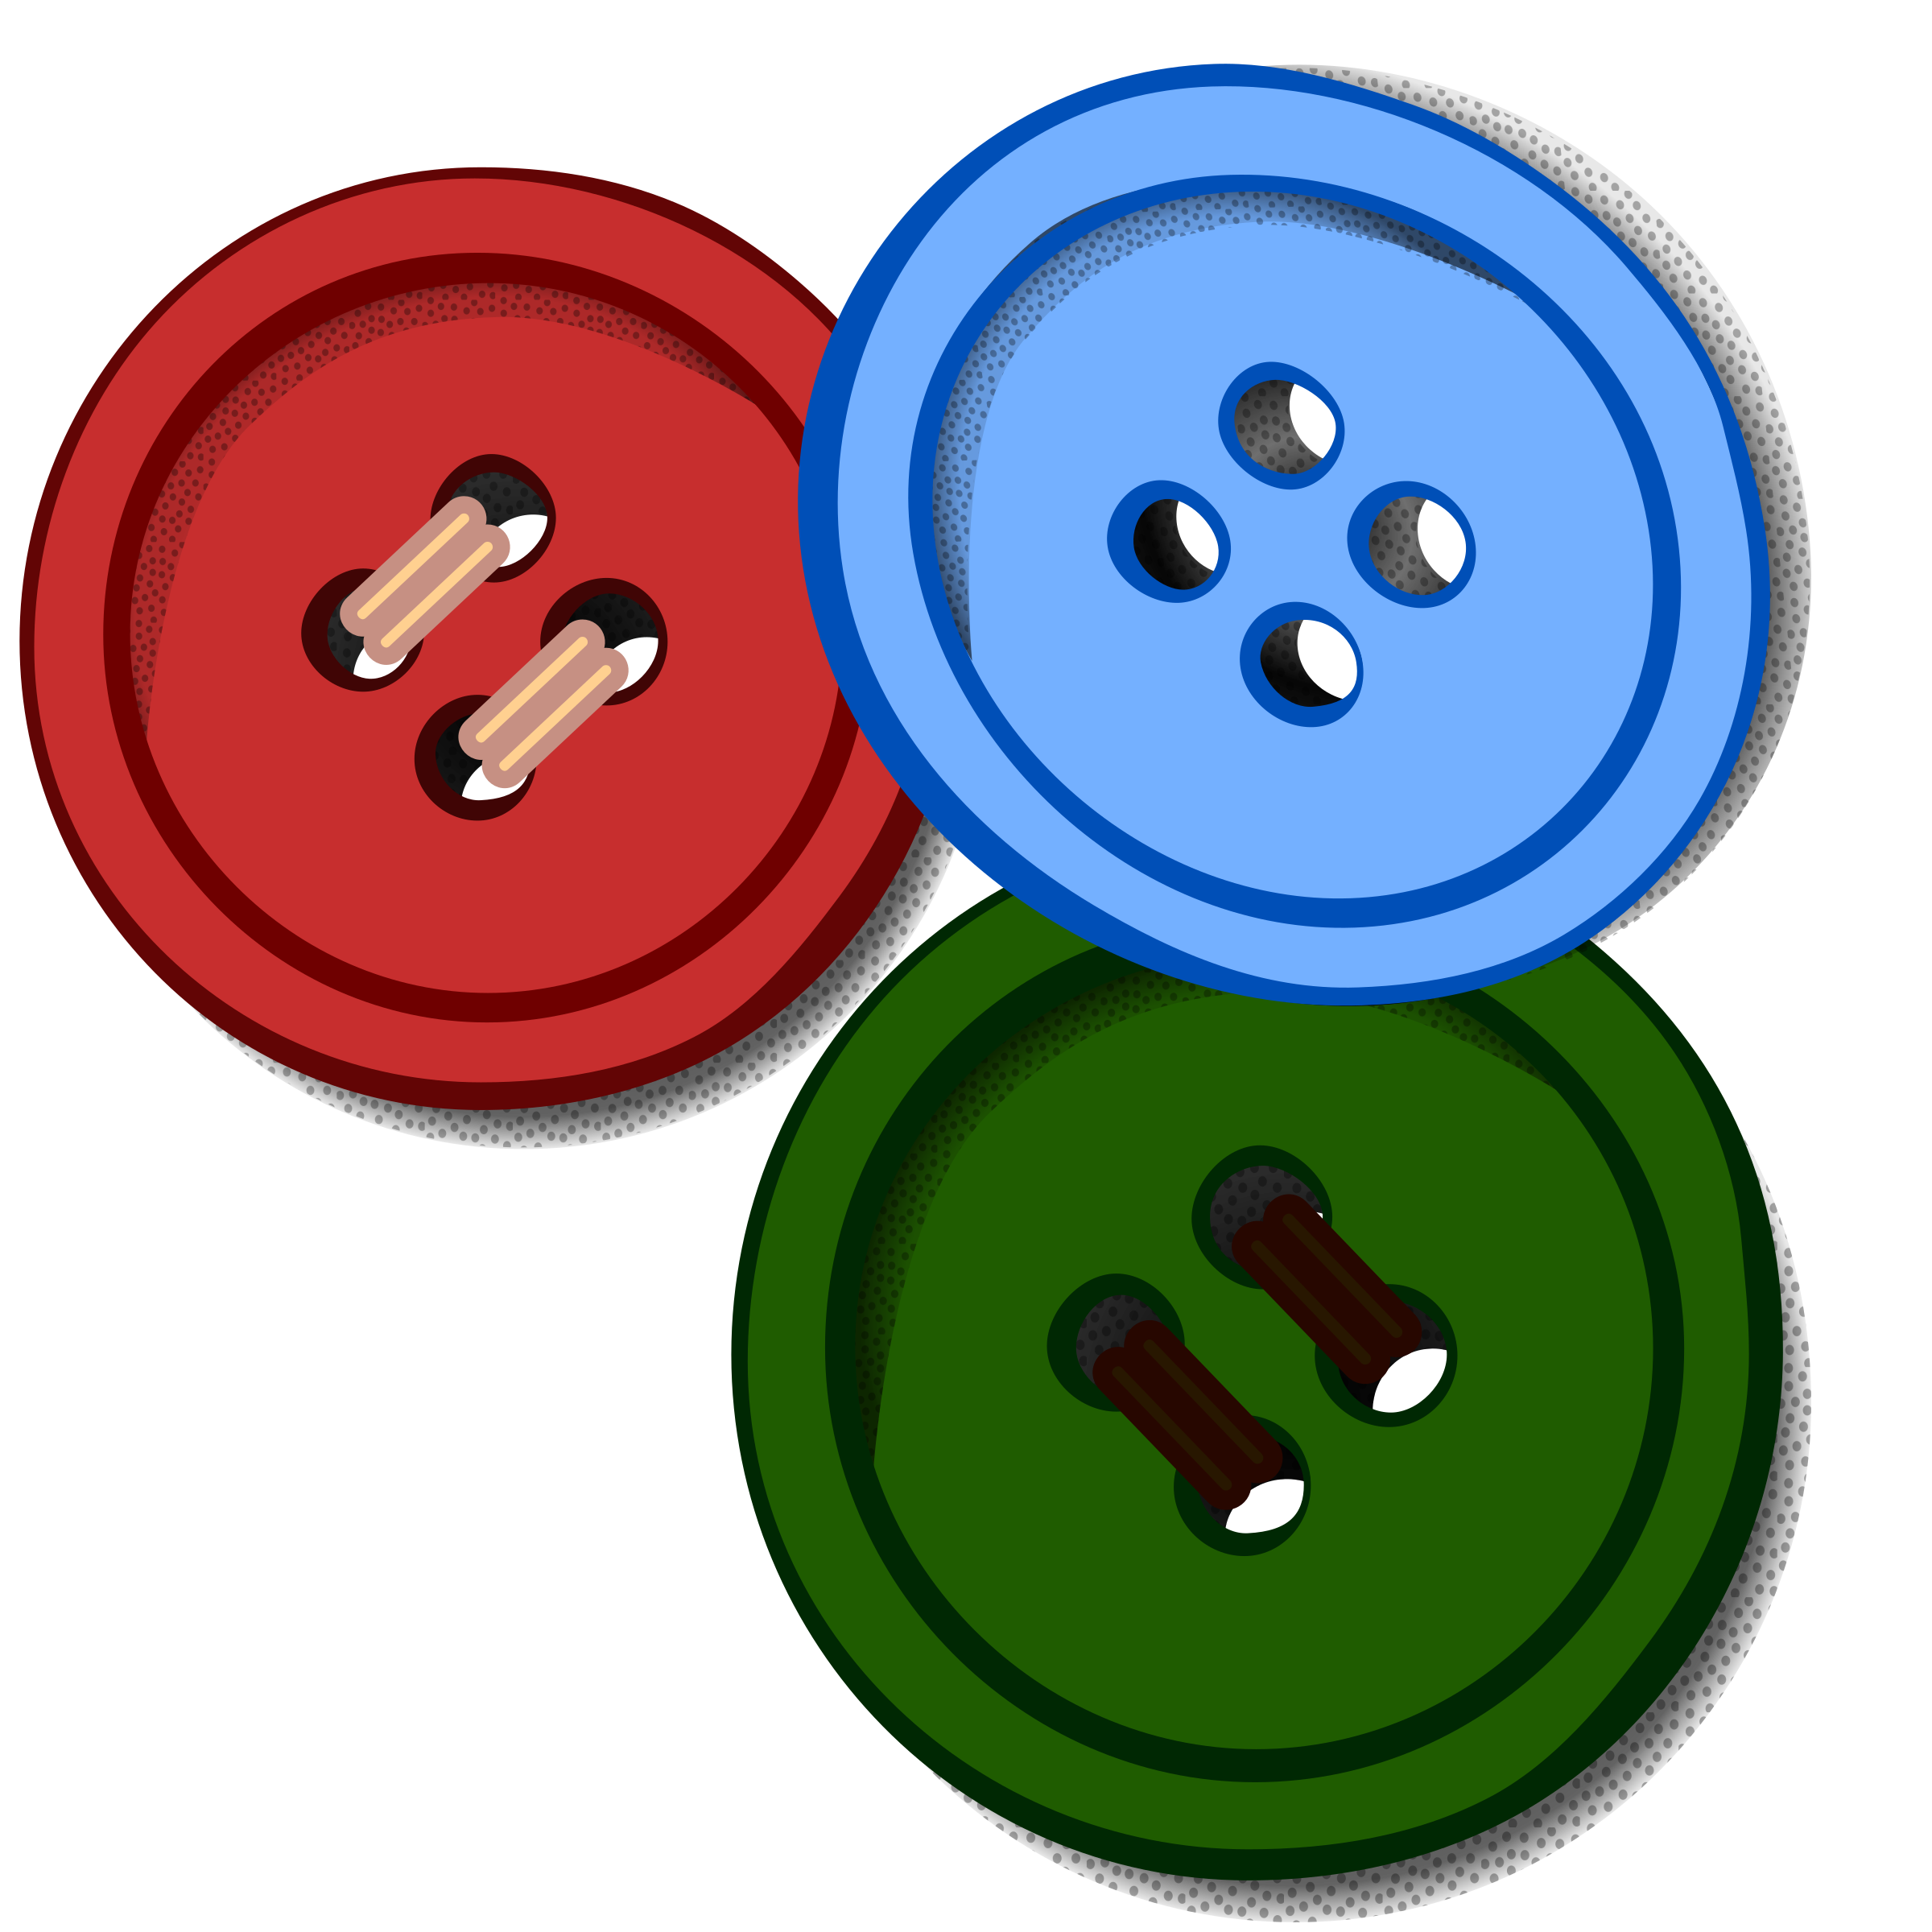 Download Colored Buttons vector files image - Free stock photo - Public Domain photo - CC0 Images